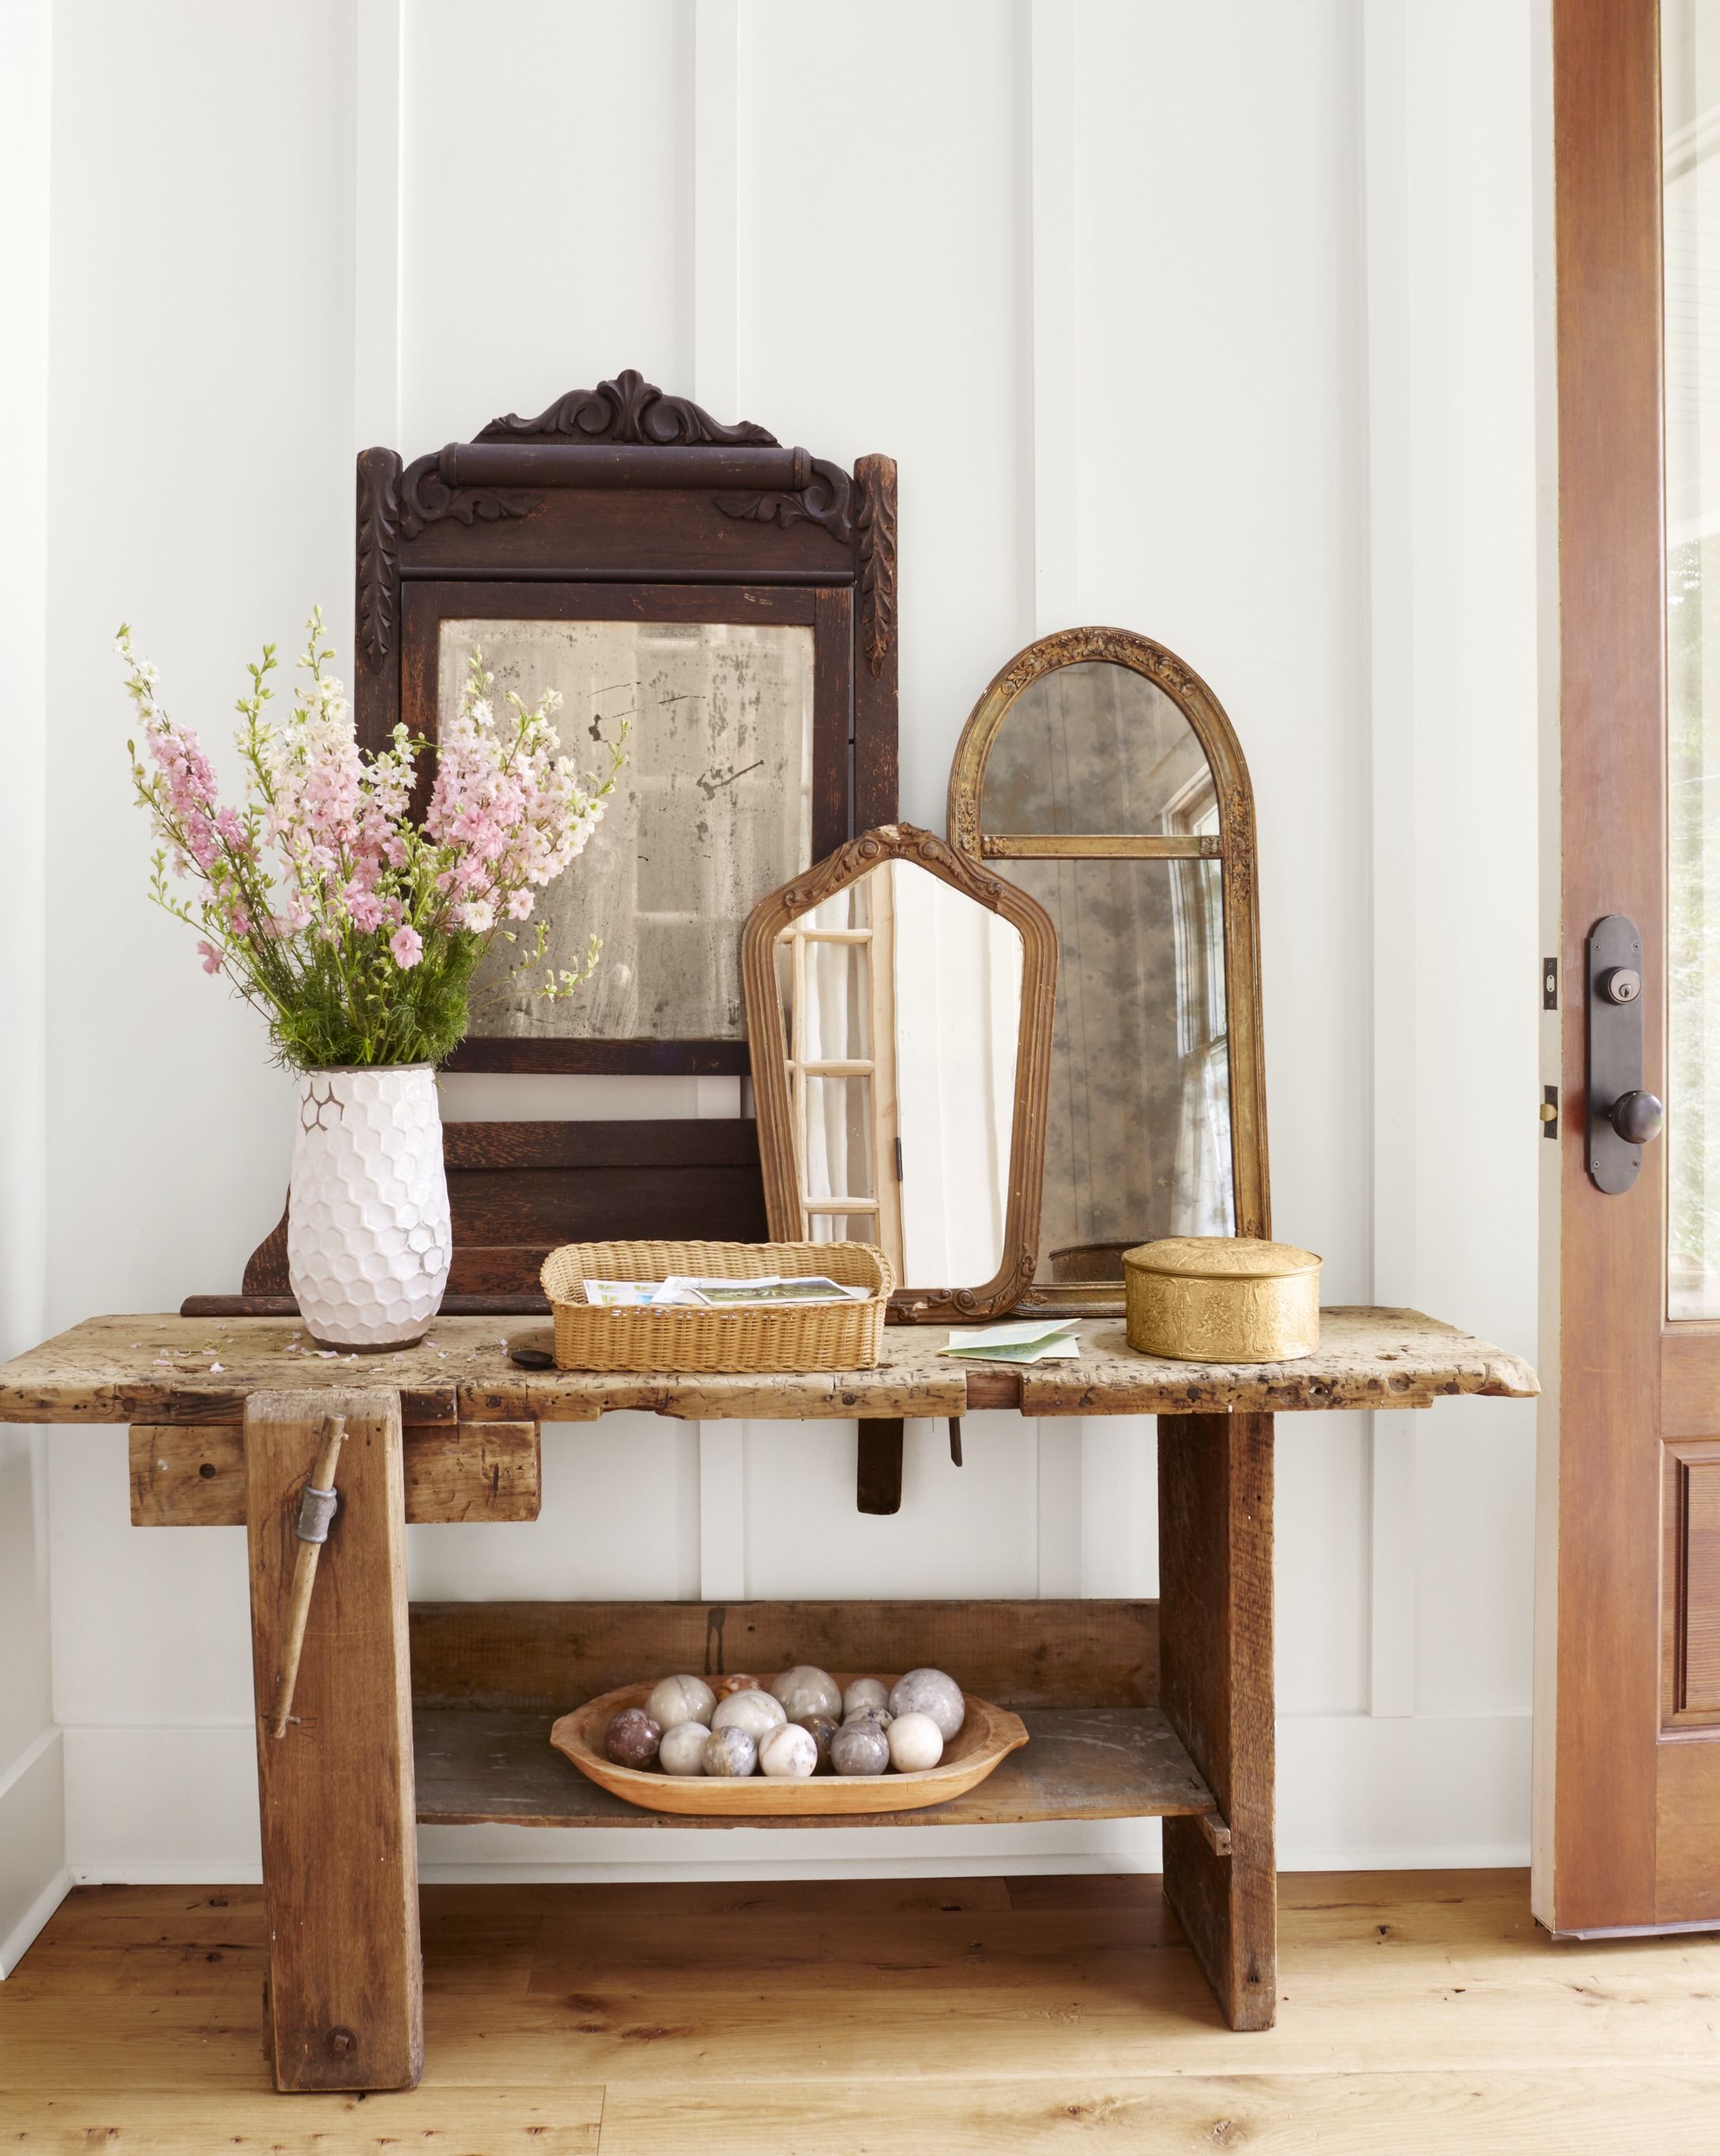 Rustic Spring Decor Ideas for Your Home (Updated)